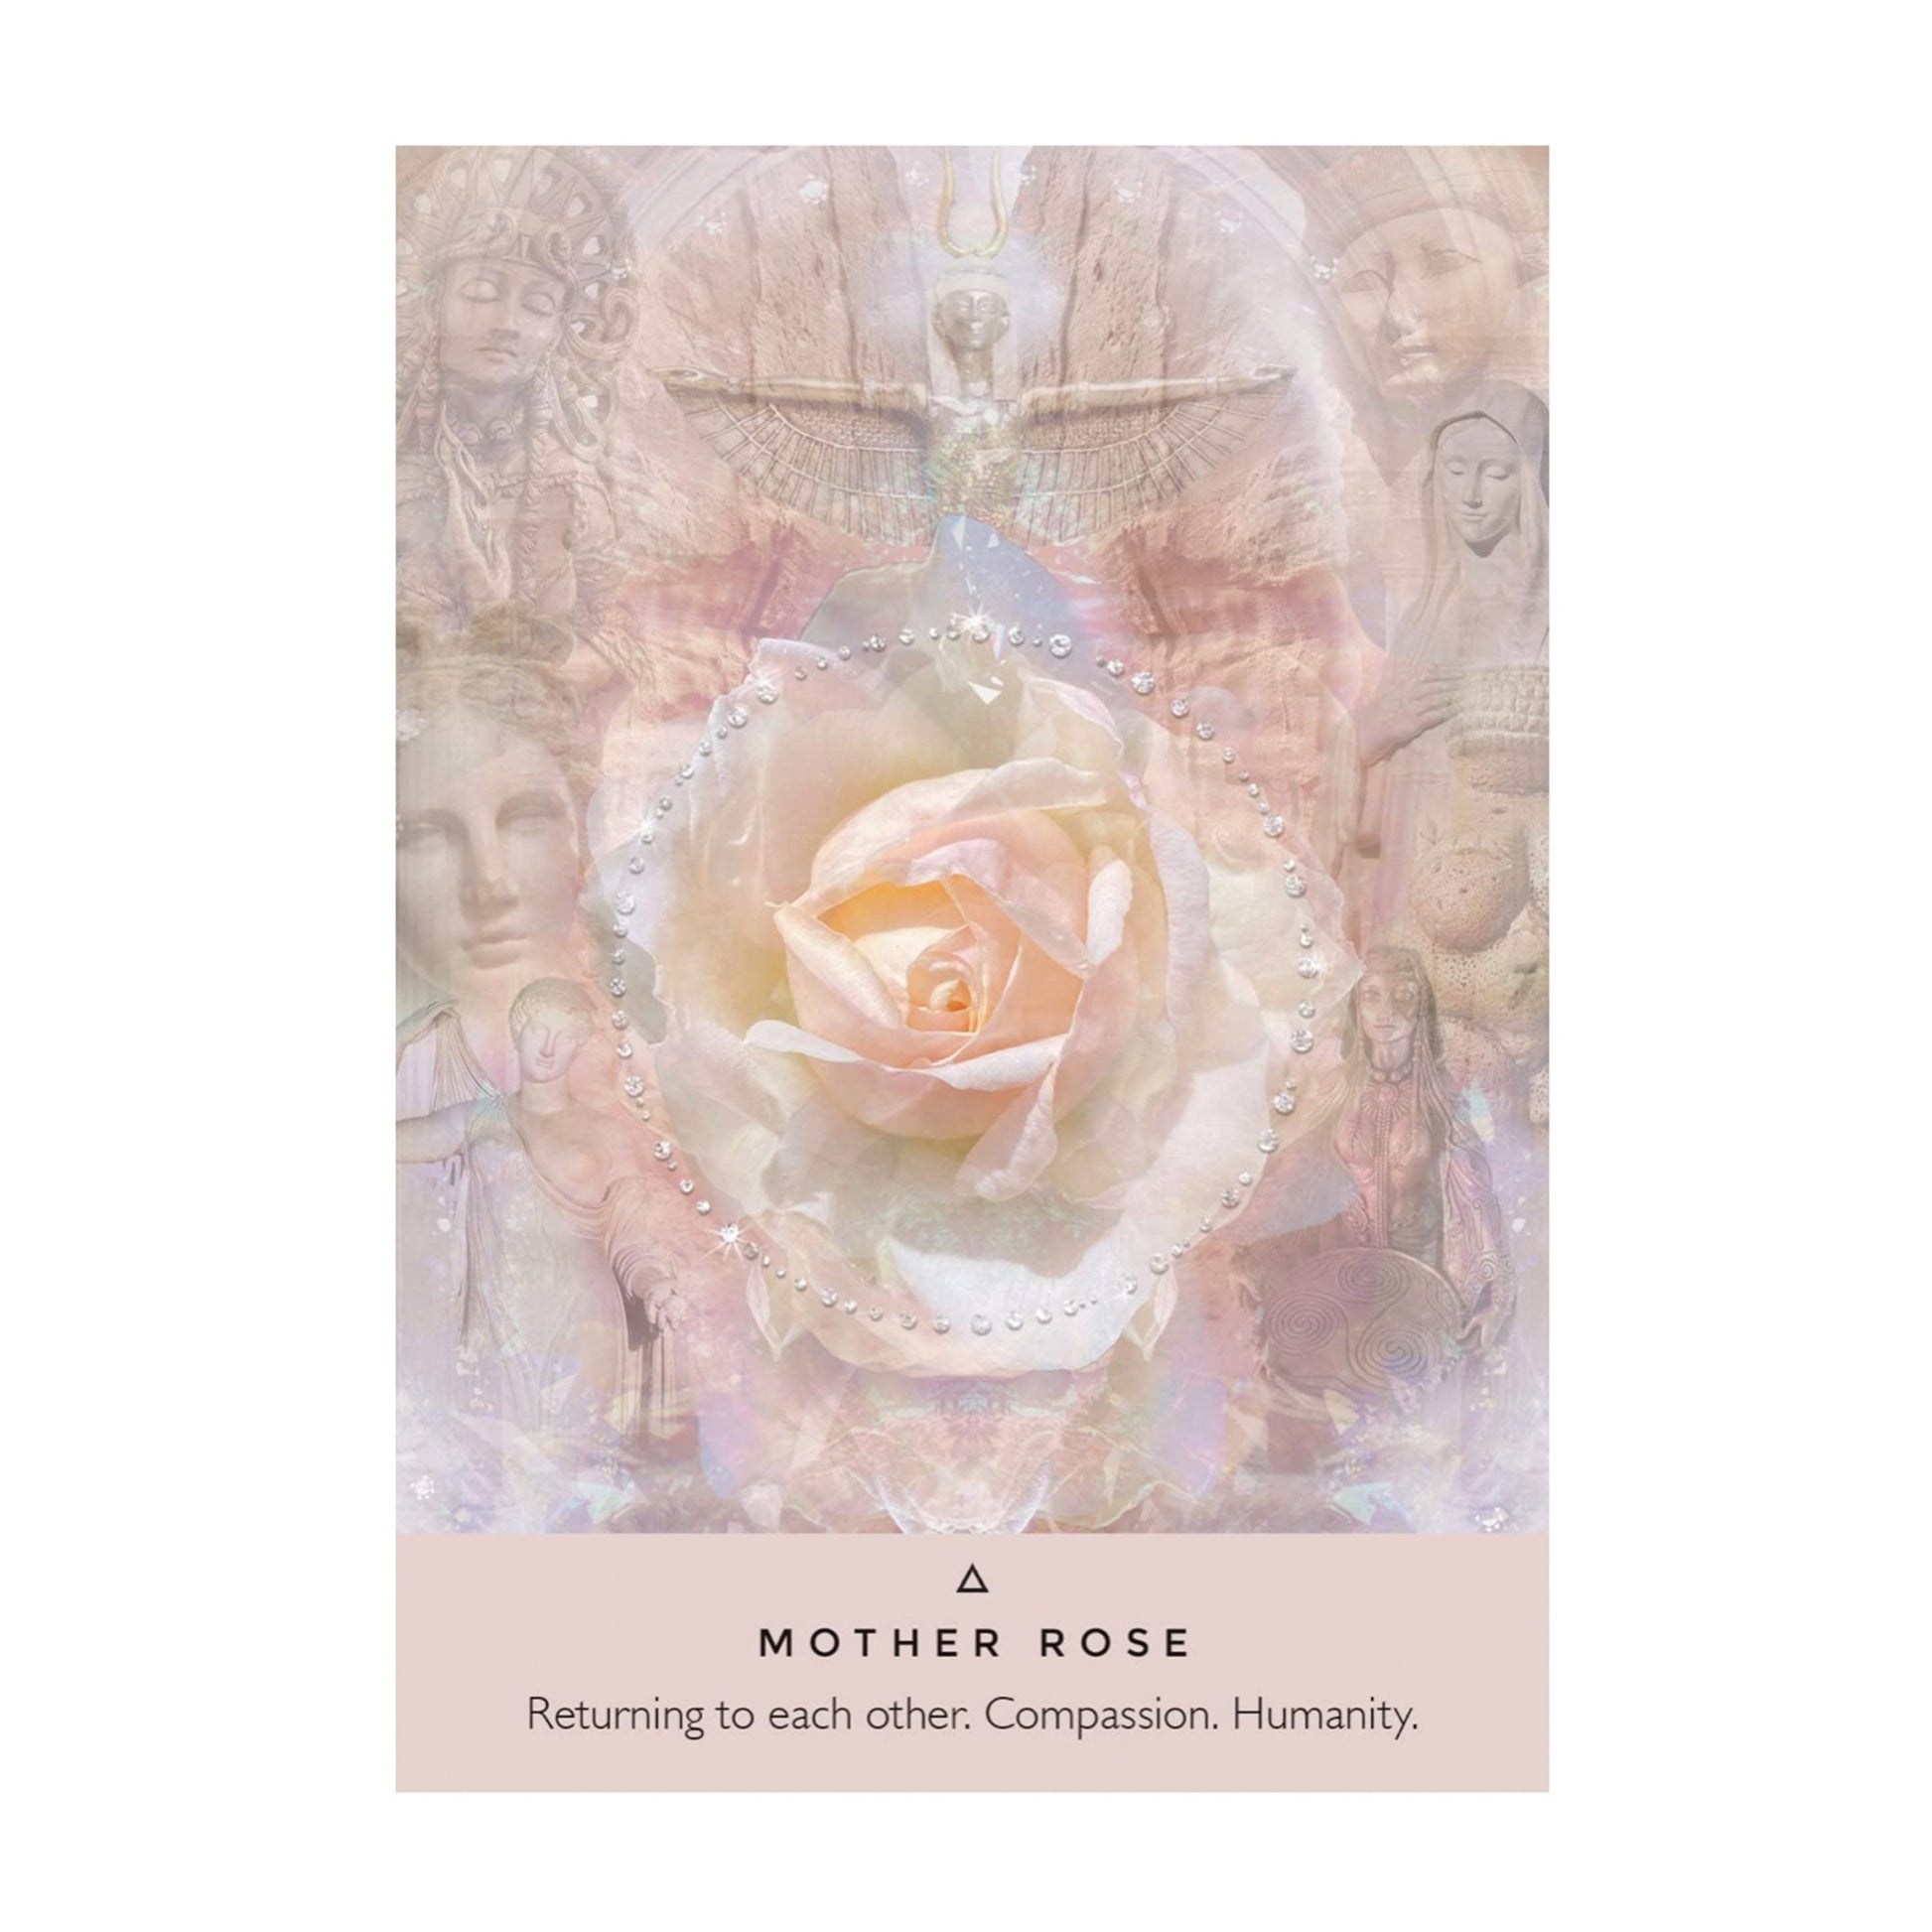 The Rose Oracle: A 44-Card Deck and Guidebook by Rebecca Campbell - Muse + Moonstone